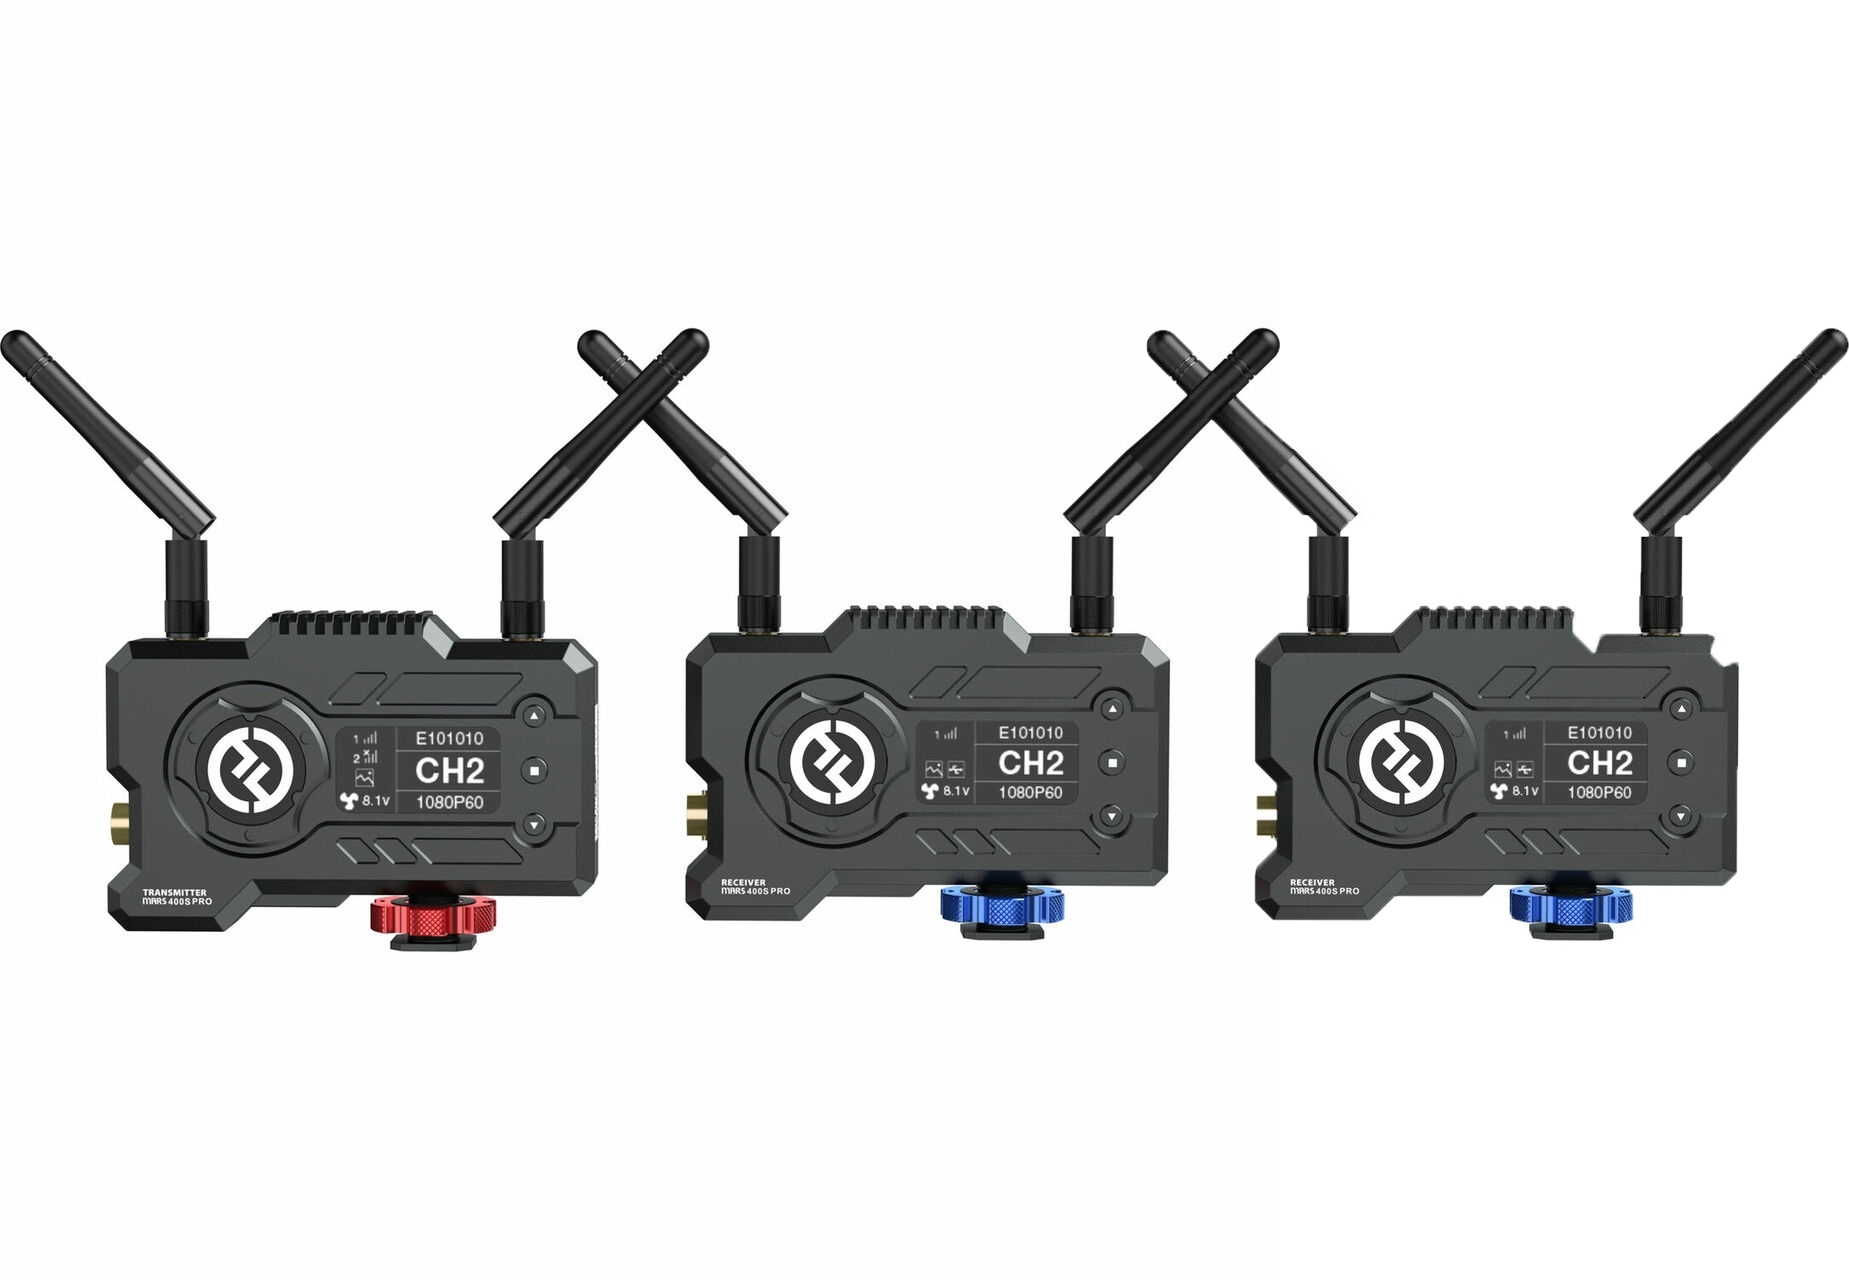 Hollyland Mars 400S PRO 2RX SDI/HDMI Wireless Video Transmission System with Additional Receiver